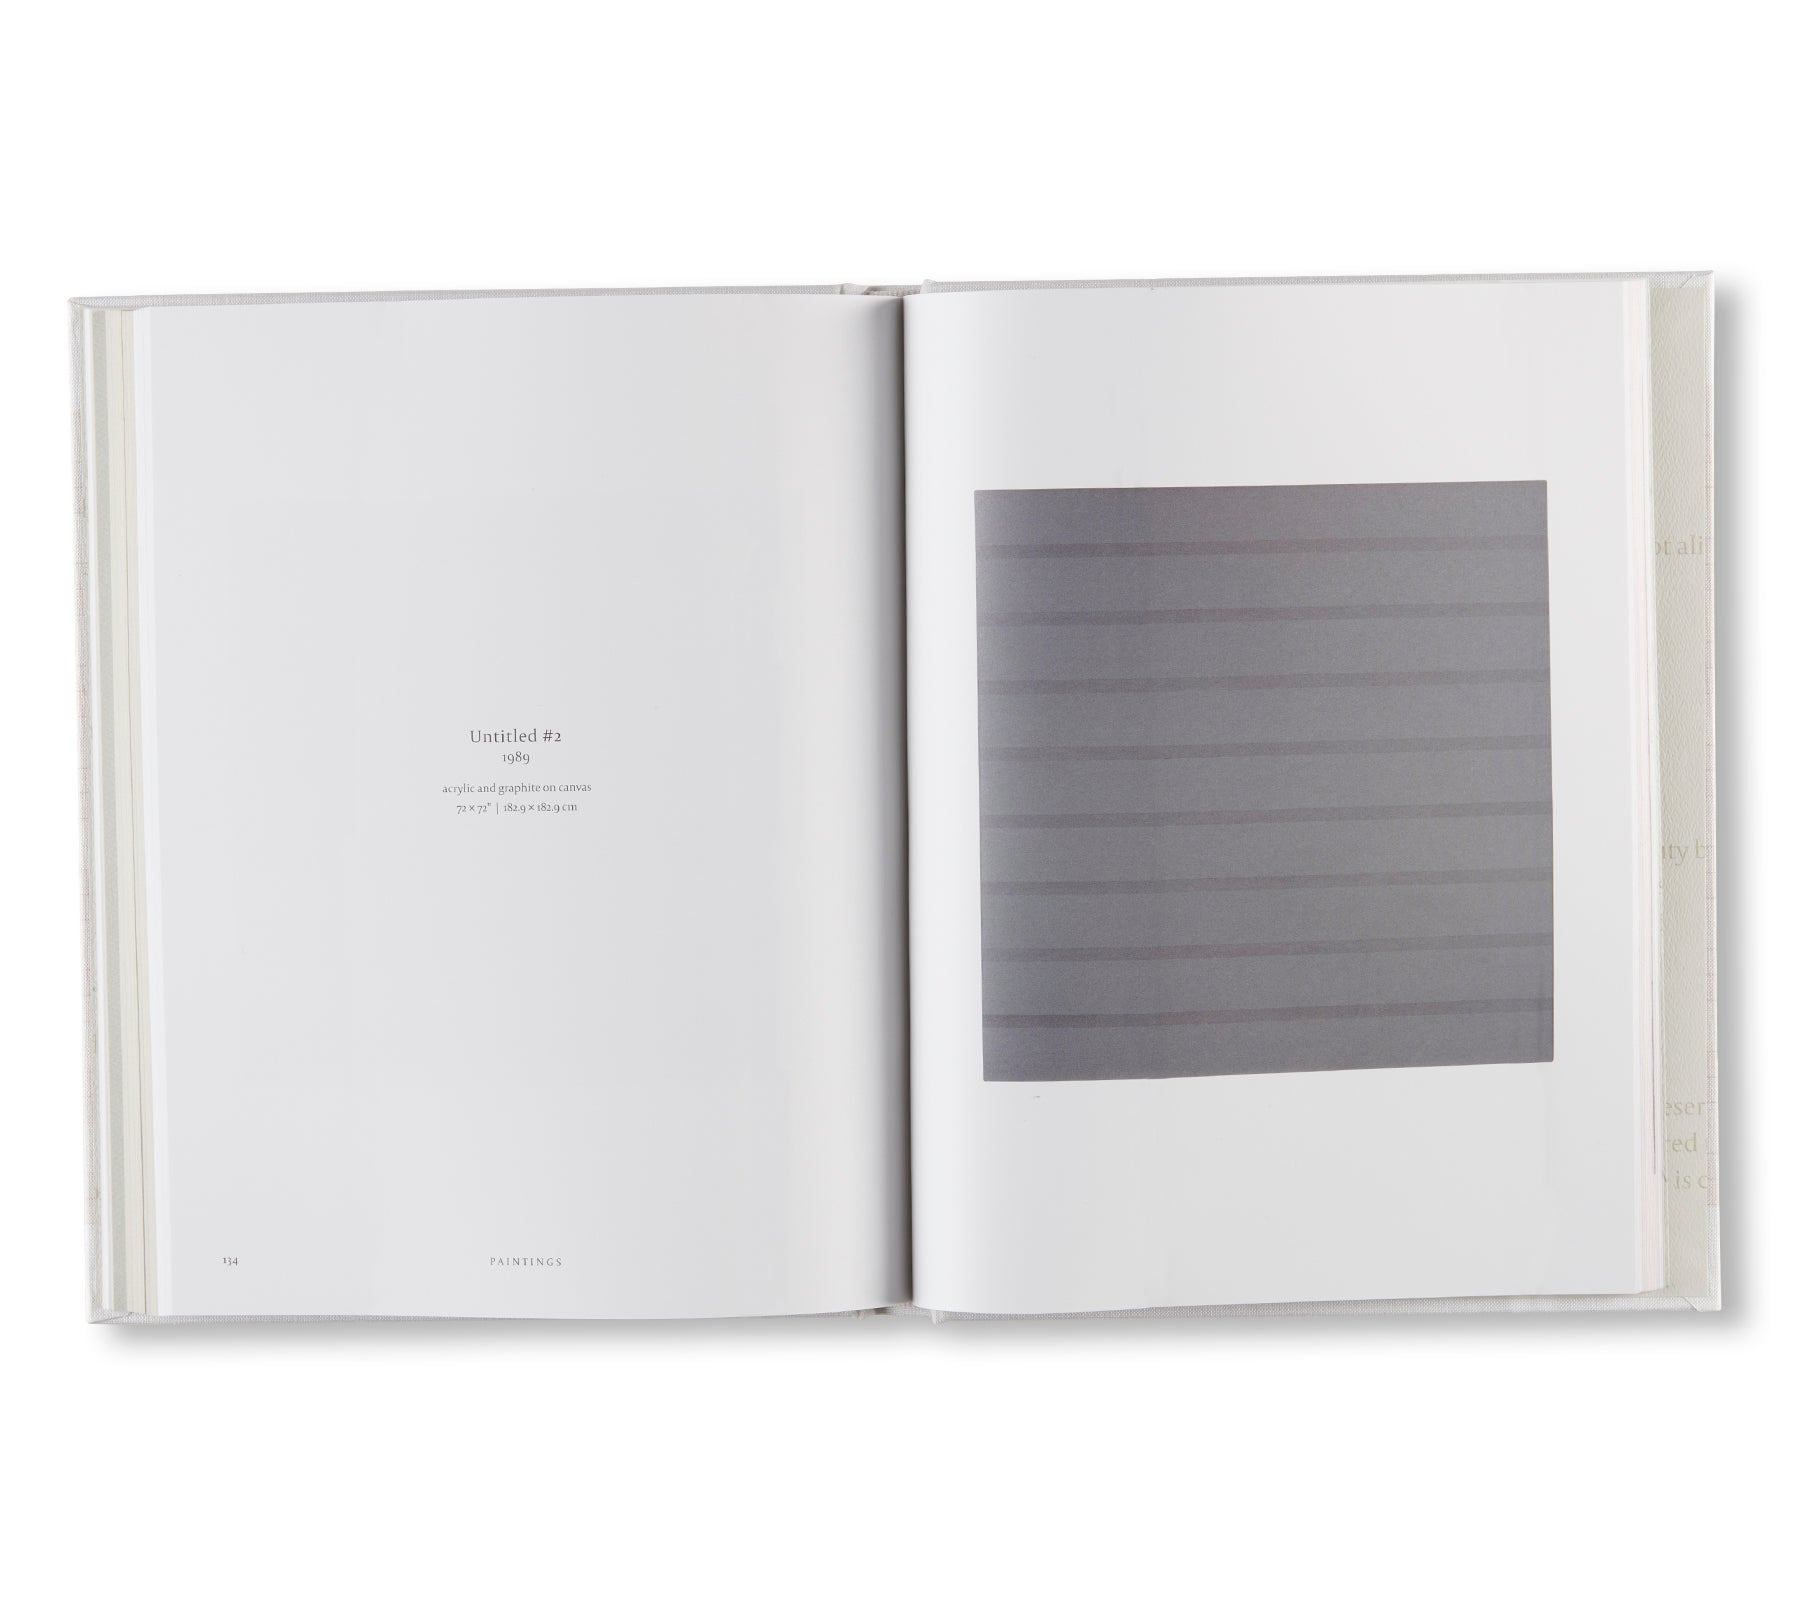 THE DISTILLATION OF COLOR by Agnes Martin